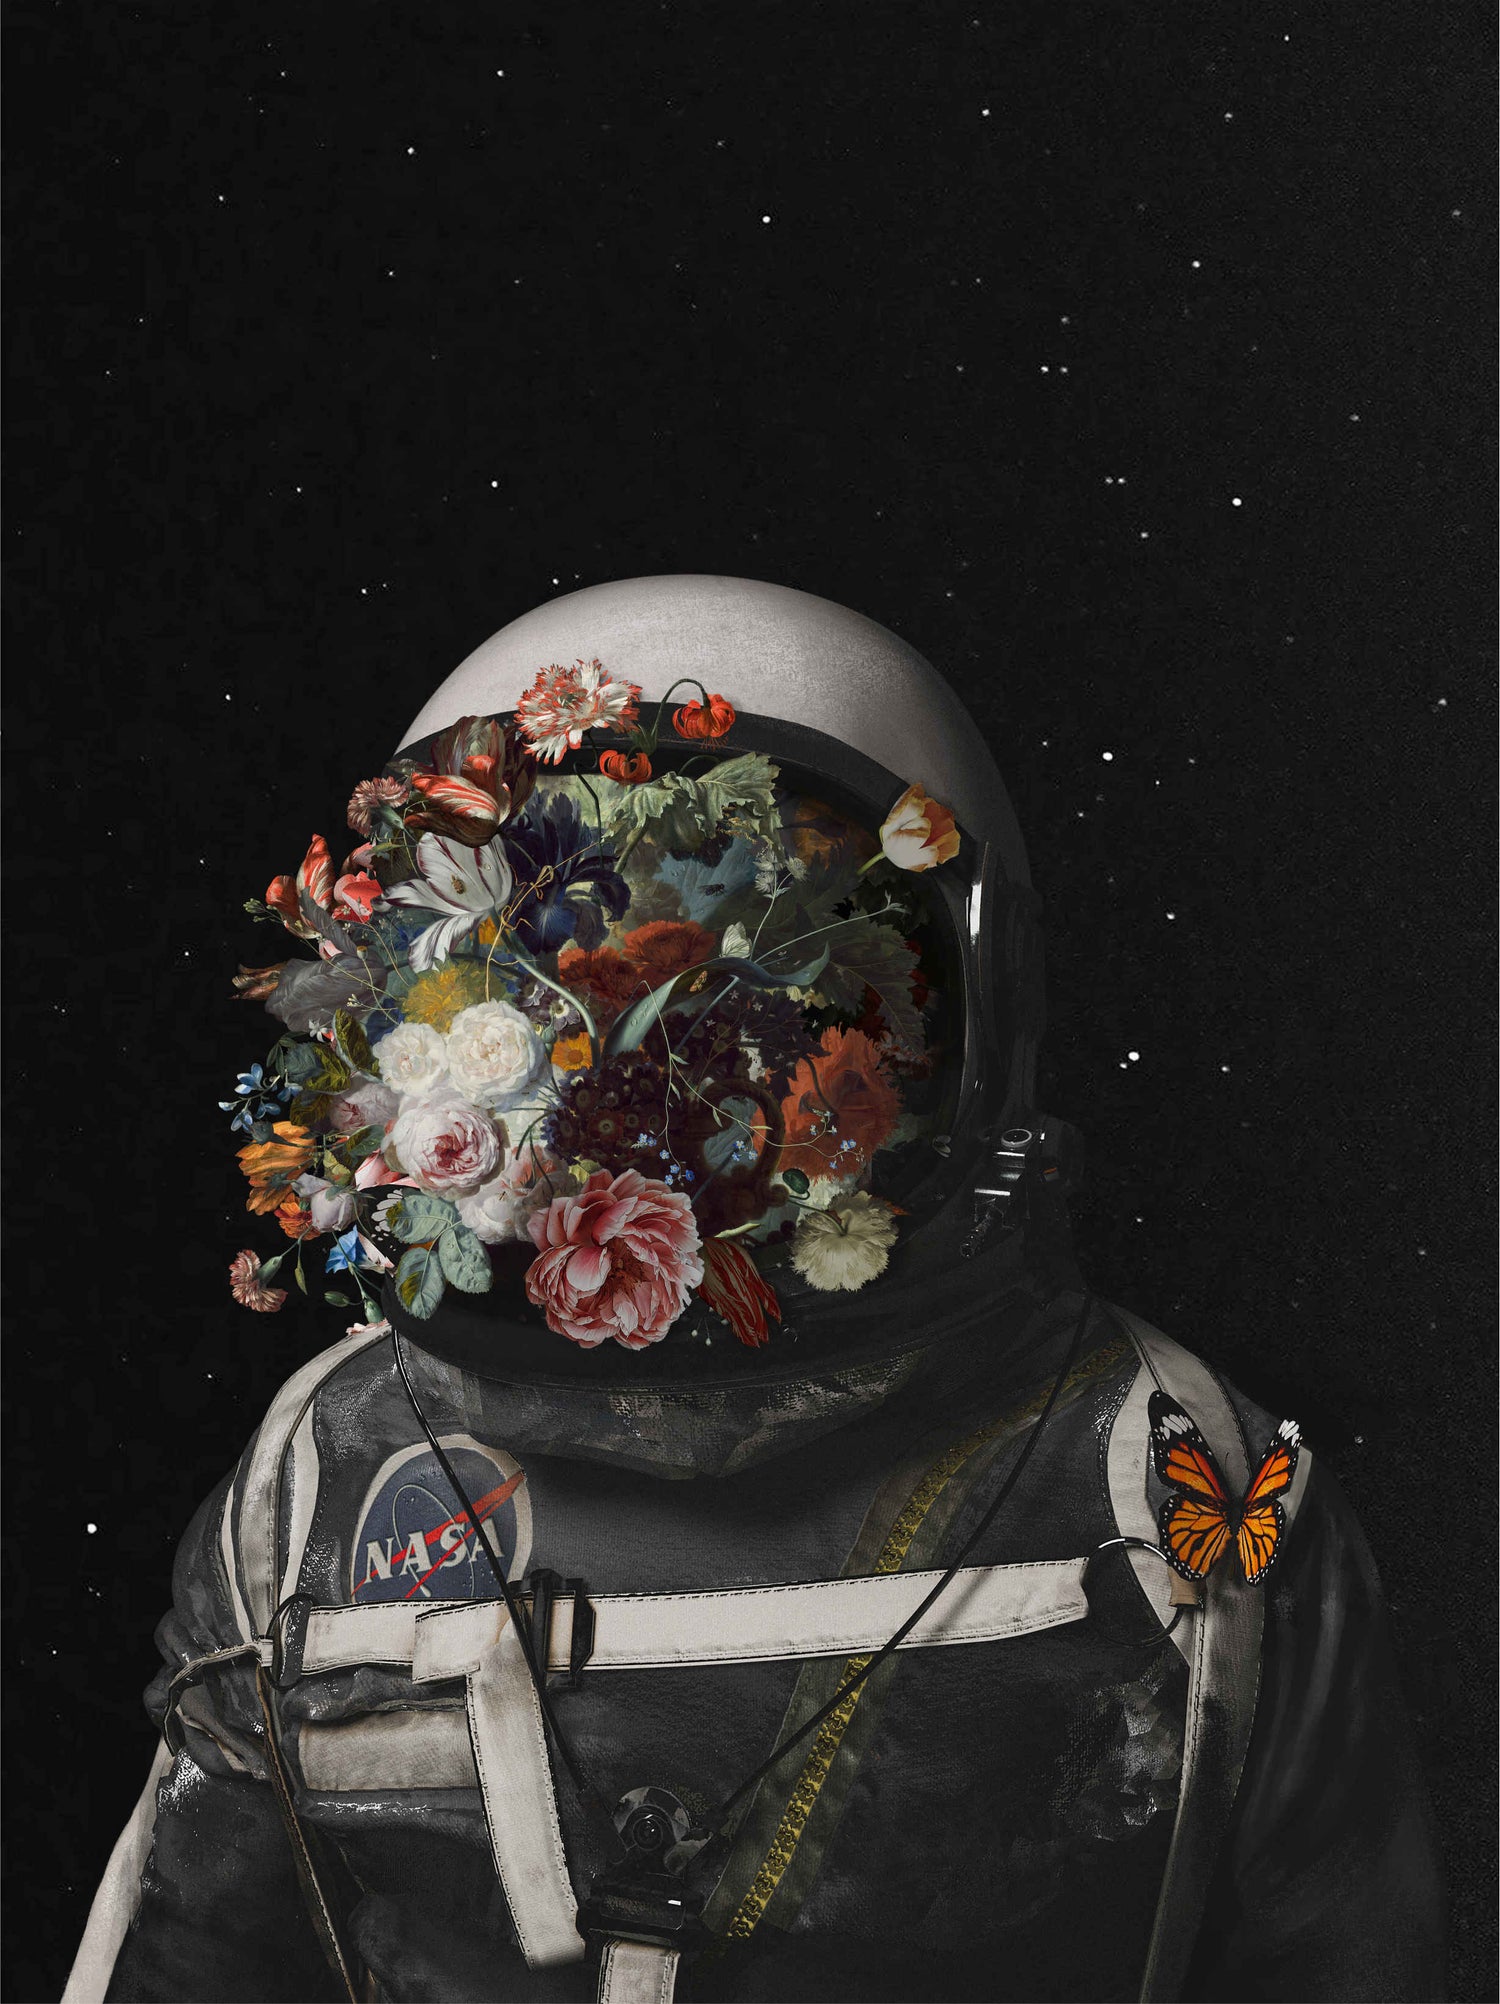 Cosmic Bloom: Astronaut and Flowers